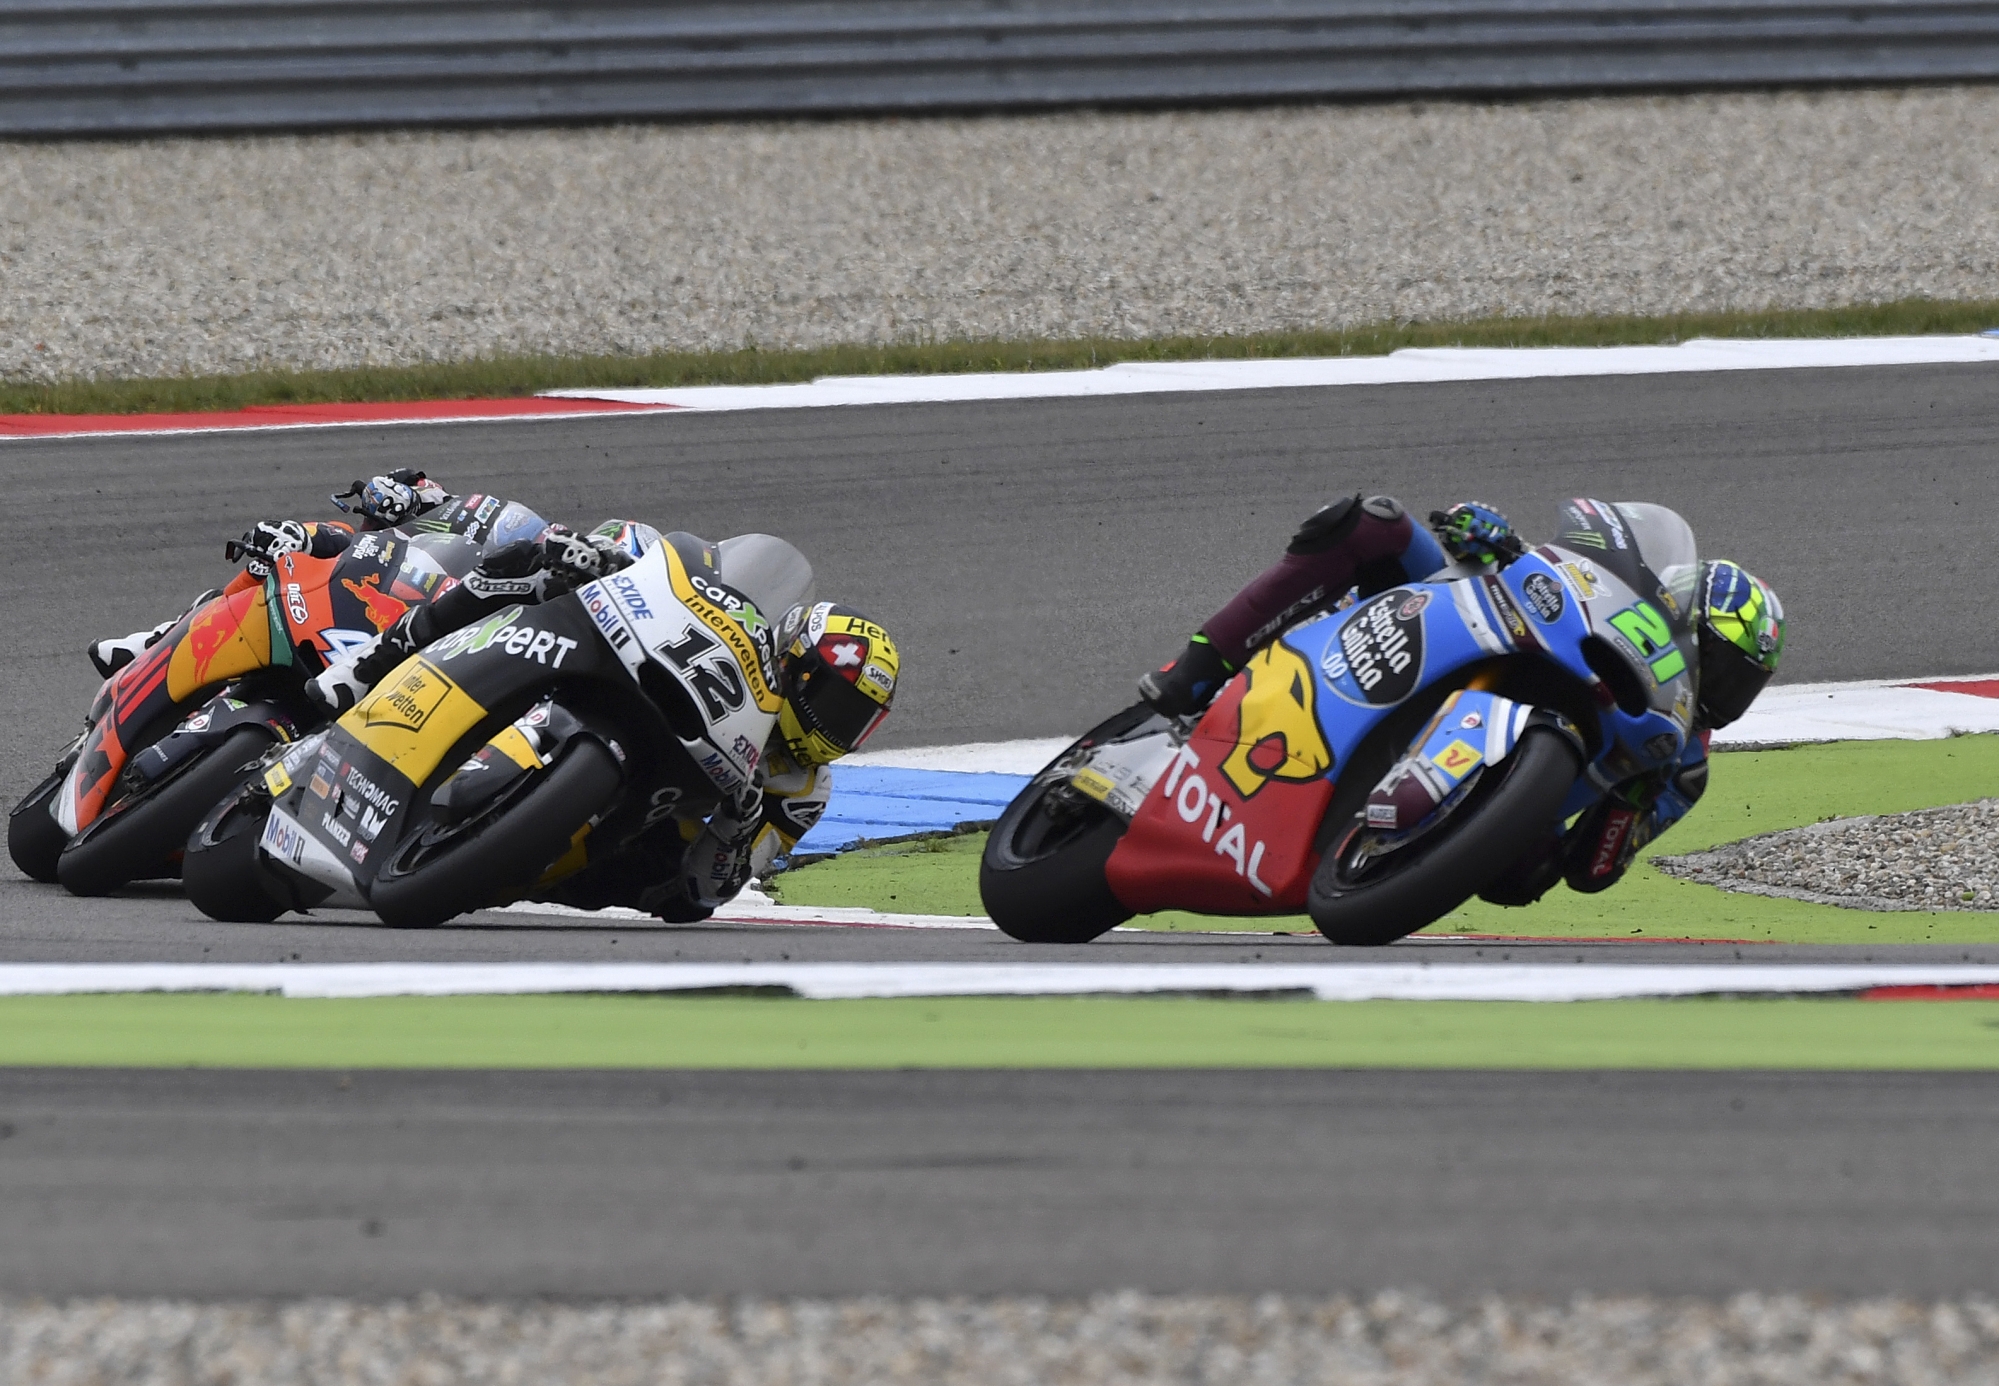 Moto 2 rider Franco Morbidelli of Italy, right, takes a curve followed by Thomas Luethi of Switzerland during the Dutch Motorcycle Grand Prix, in Assen, Northern Netherlands, Sunday, June 25, 2017. (AP Photo/Geert Vanden Wijngaert)